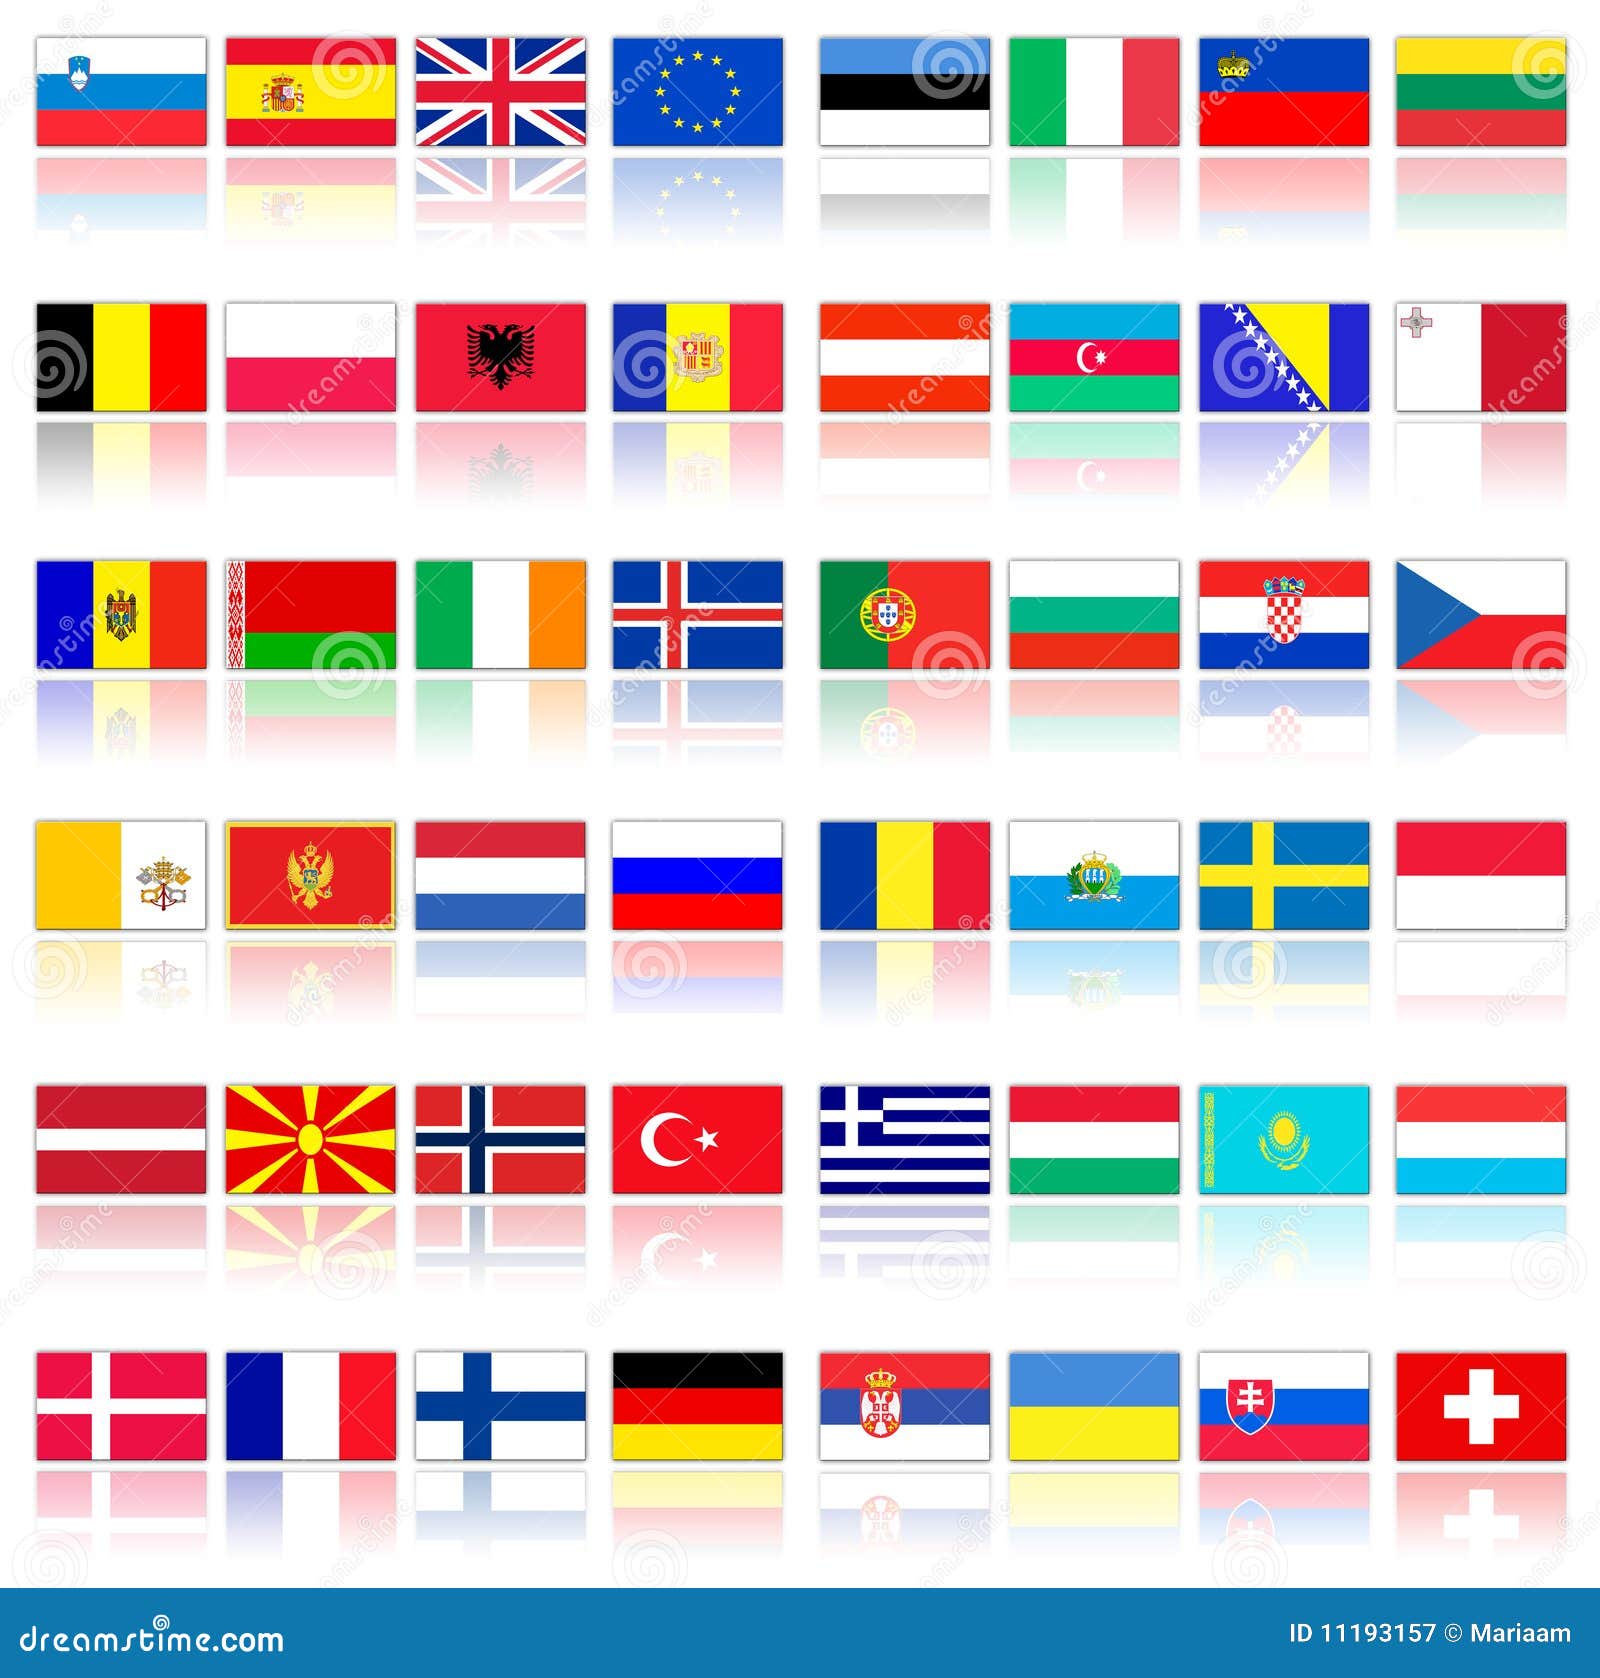 Flags Of European Countries Royalty Free Stock Photography - Image